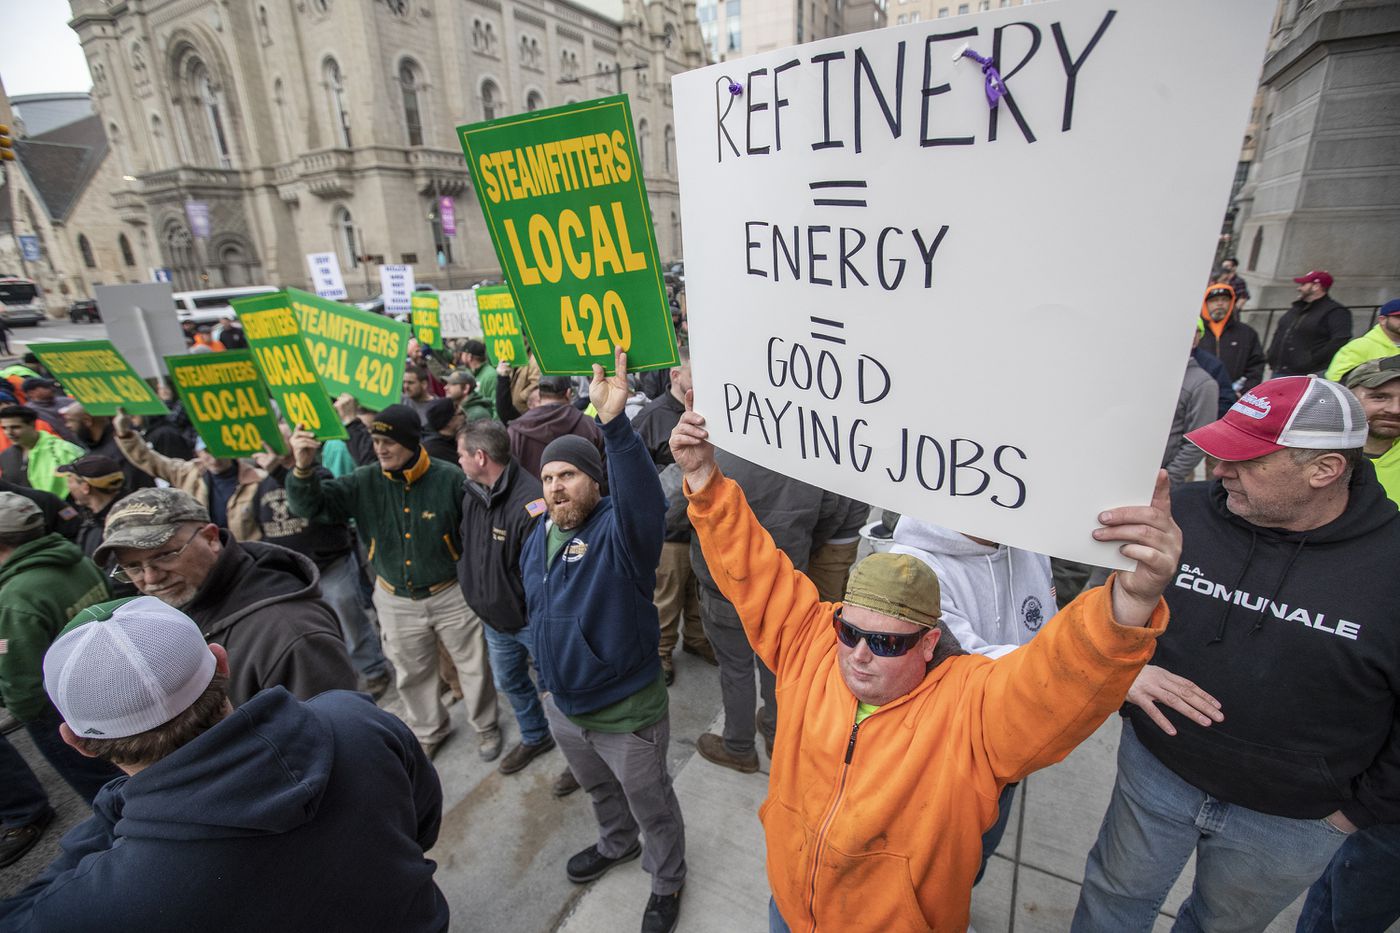 Mike Carney (right) of Steamfitters Local 420, rallies with fellow building trade union members in front of City Hall last month in support of saving the bankrupt Philadelphia Energy Solutions refinery.